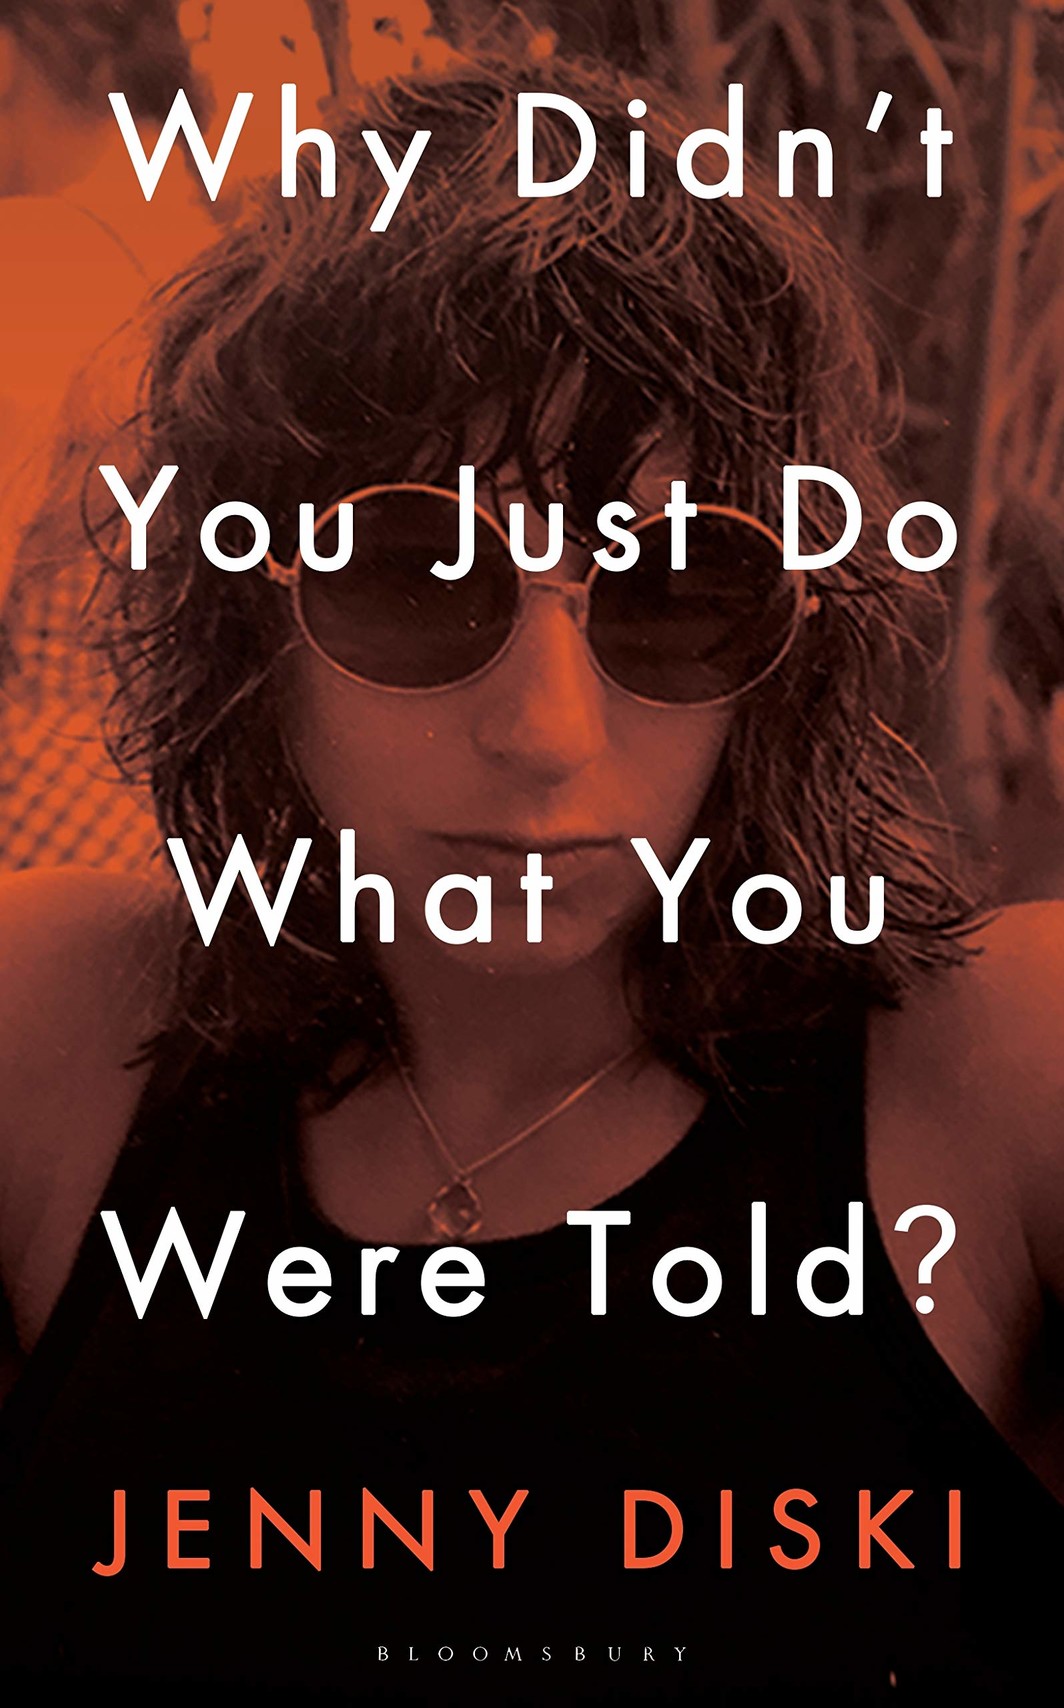 The cover of Why Didn’t You Just Do What You Were Told?